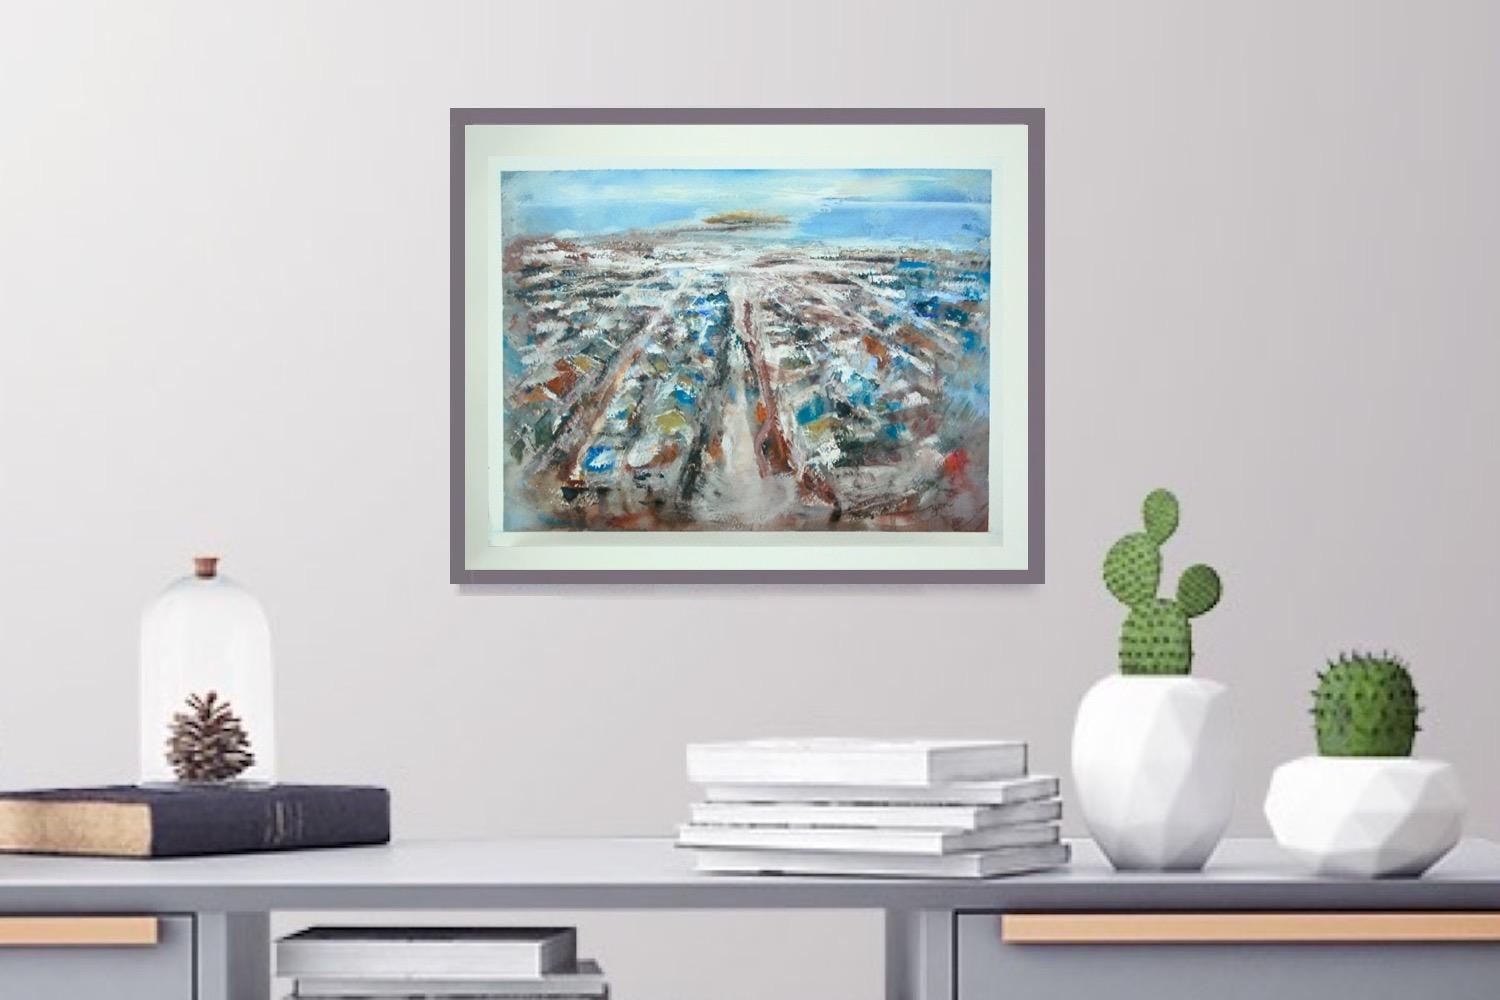 Reykjavik - Icelandic capital abstract cityscape watercolor painting art in dreamy abstract impressionist style